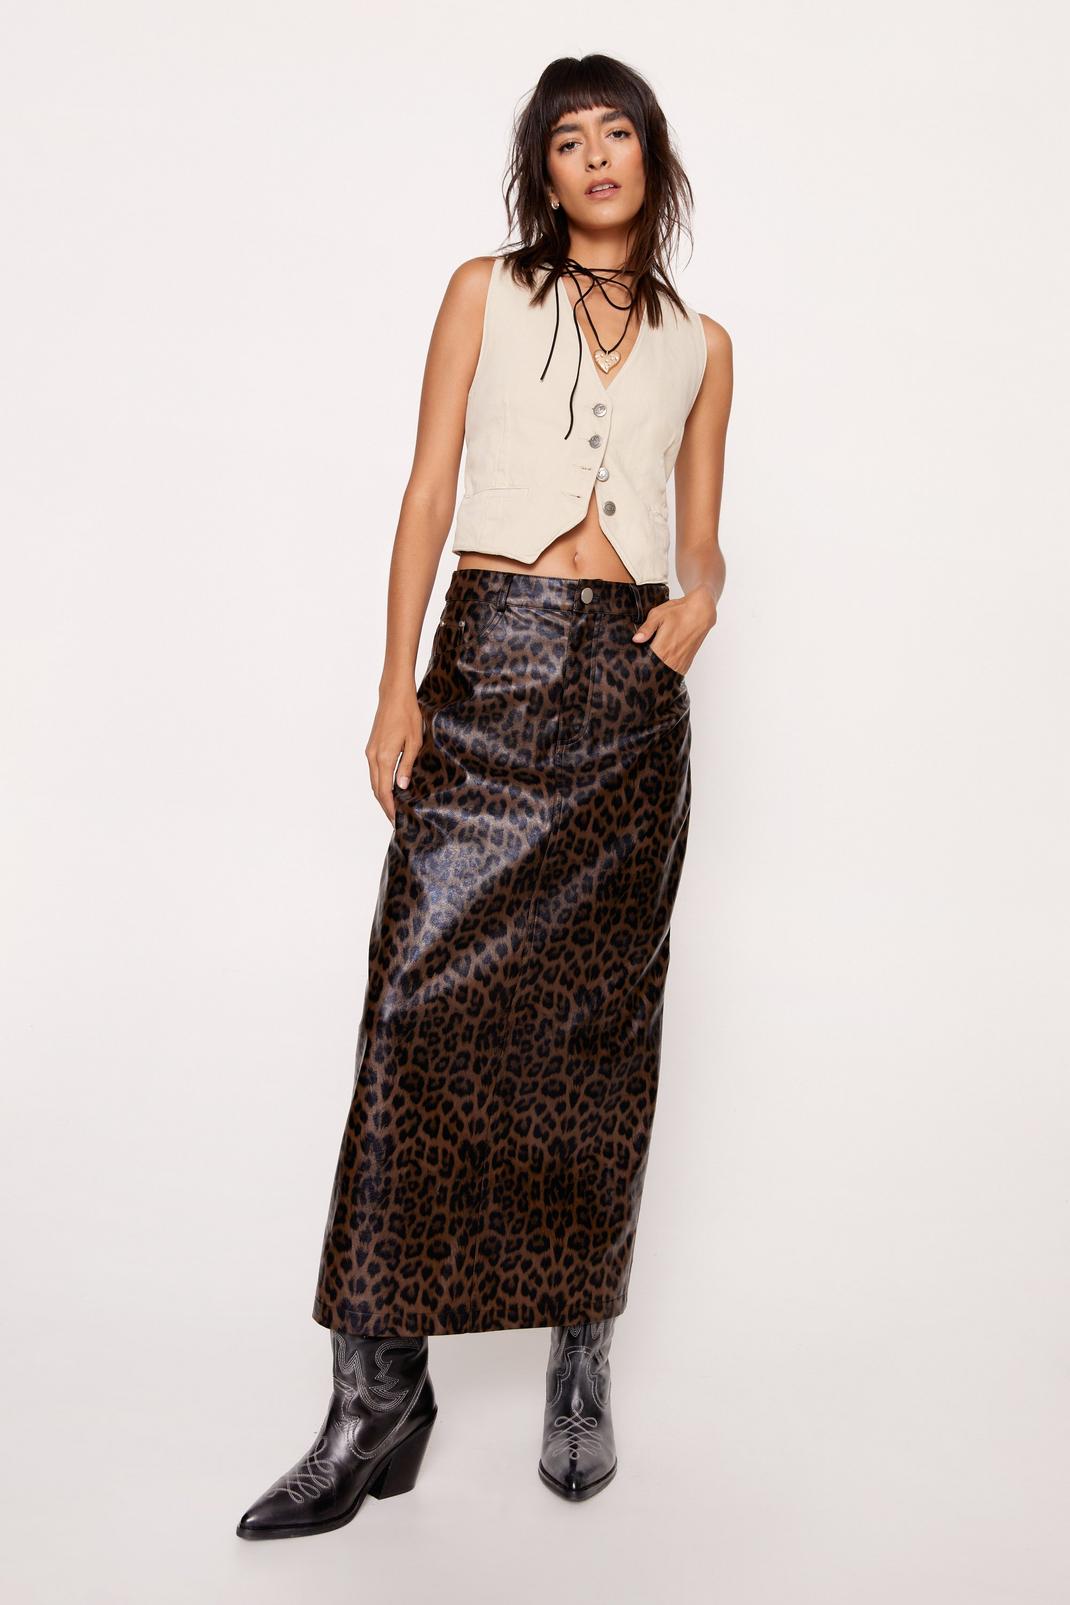 Premium Leopard Faux Leather Maxi Skirt | Nasty Gal